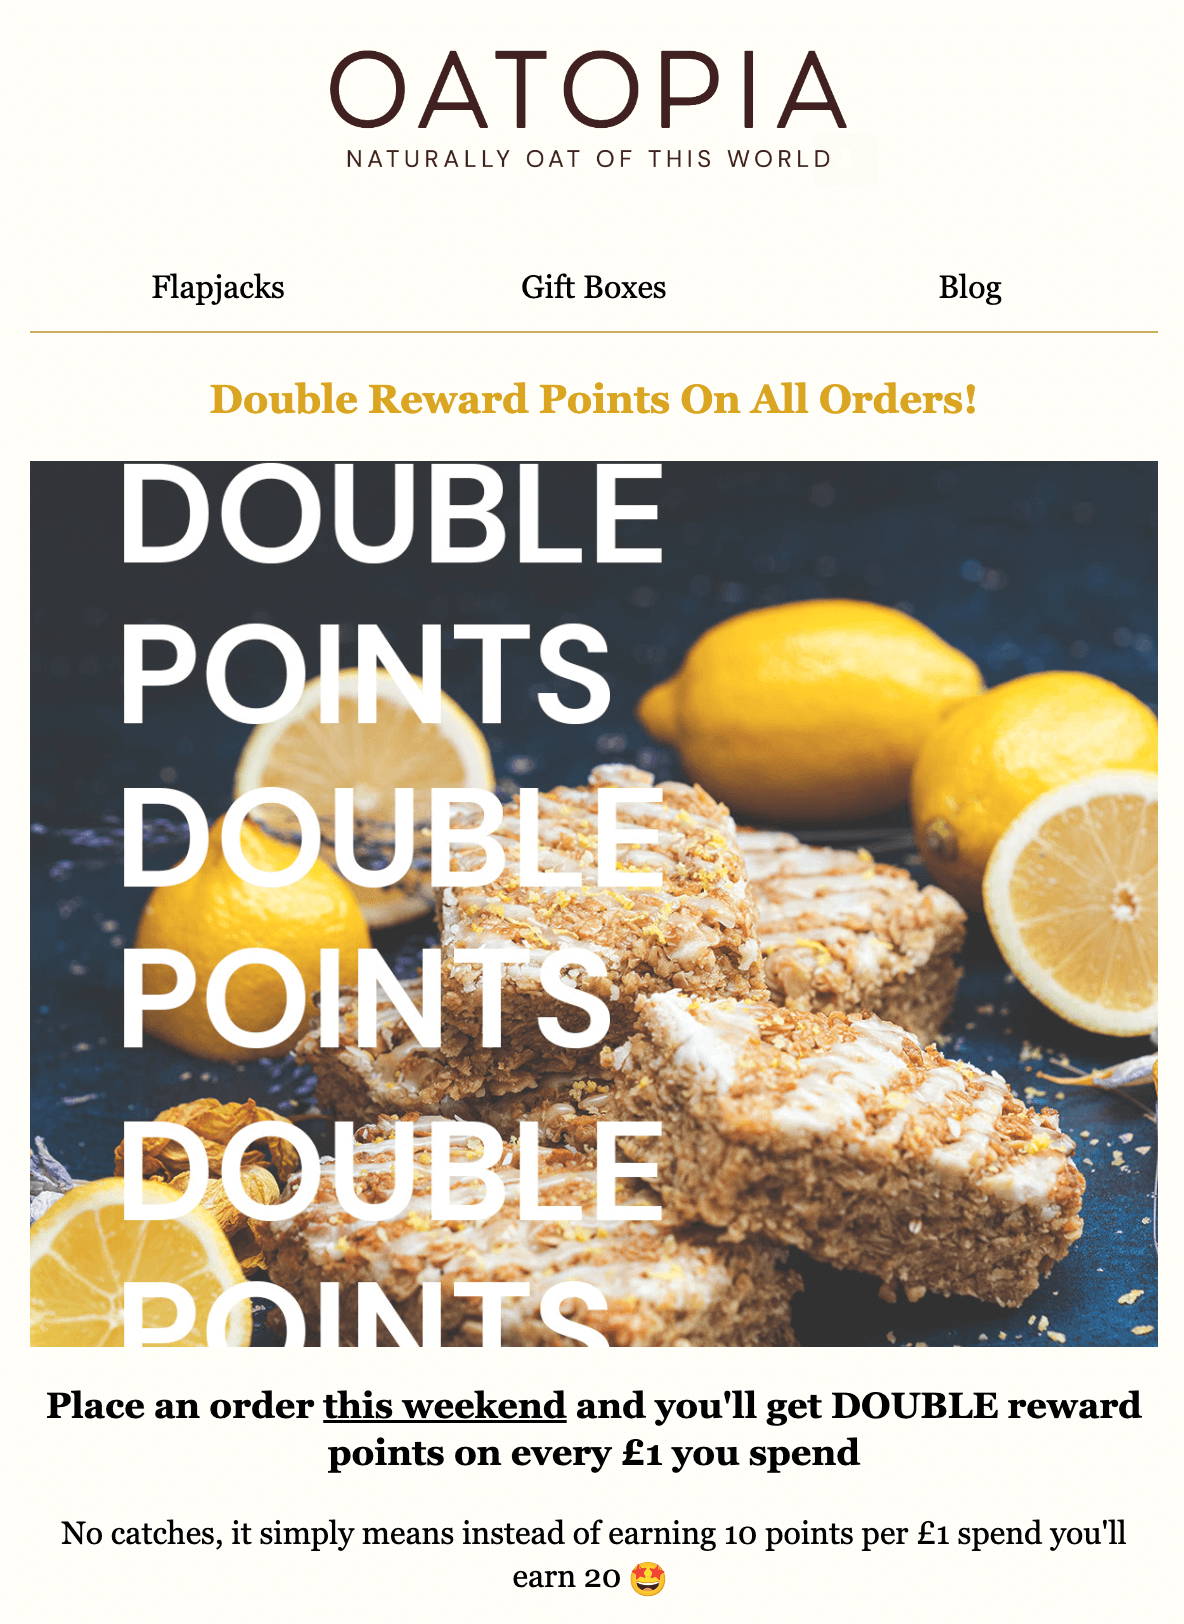 screenshot of oatopia's double points campaign